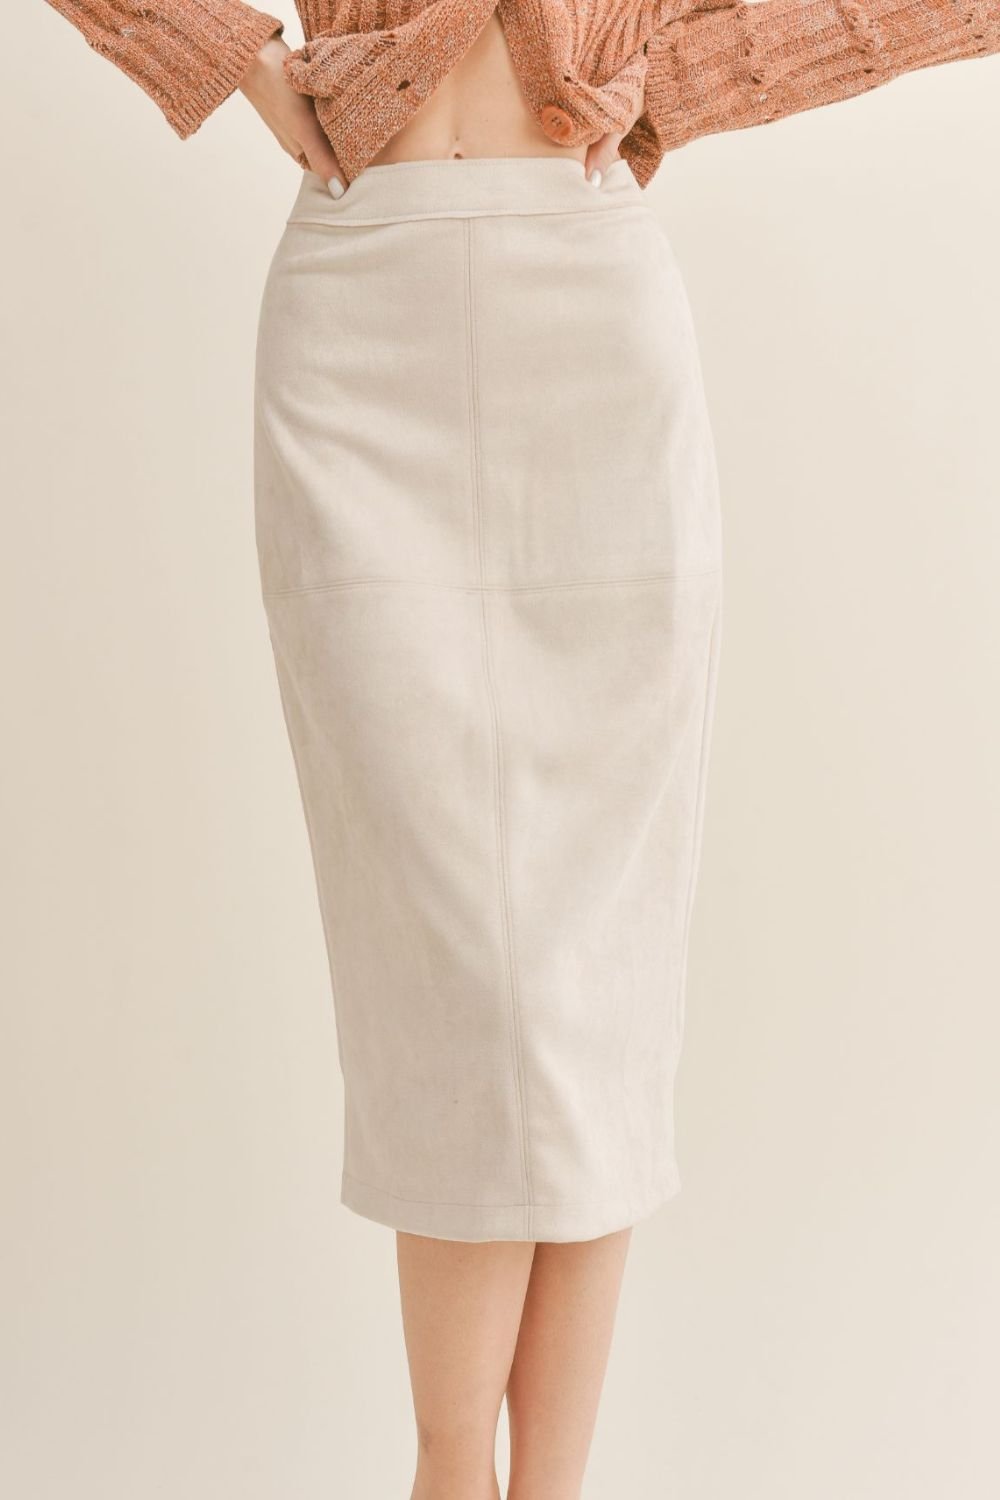 Women's Suede Midi Skirt | Sage The Label | Bone - Women's Skirts - Blooming Daily